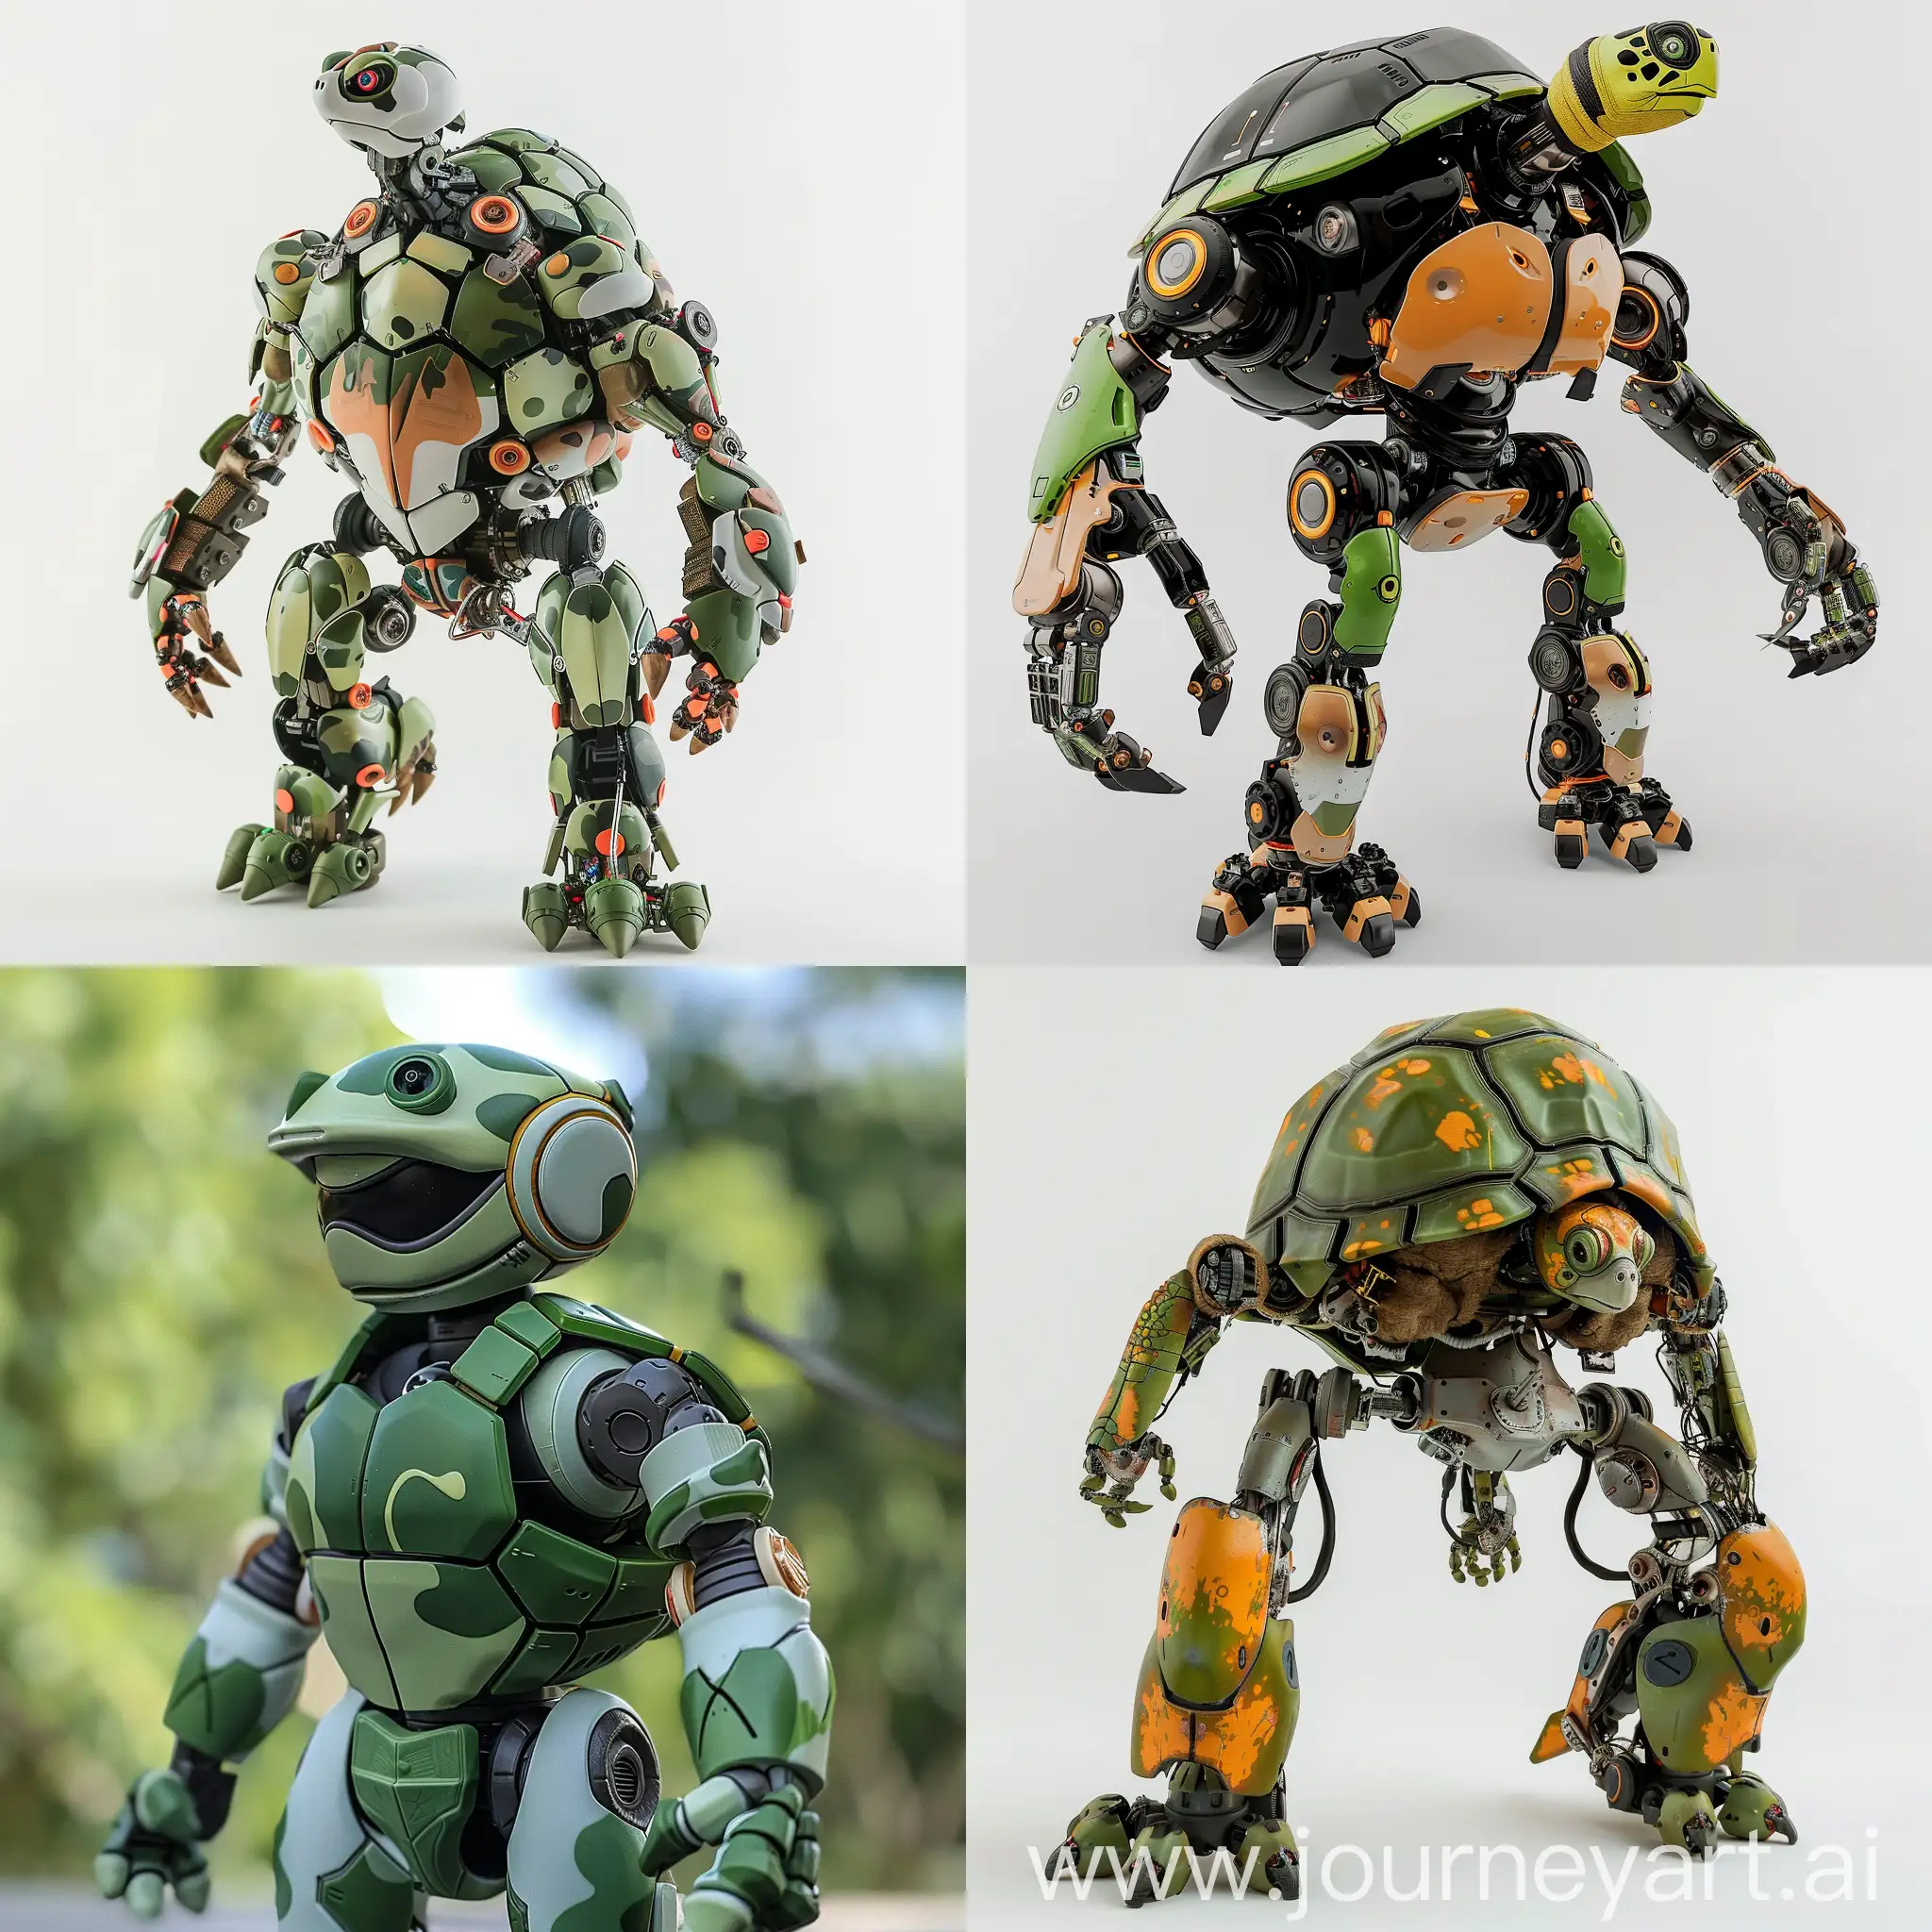 A turtle-themed Humanoid robot